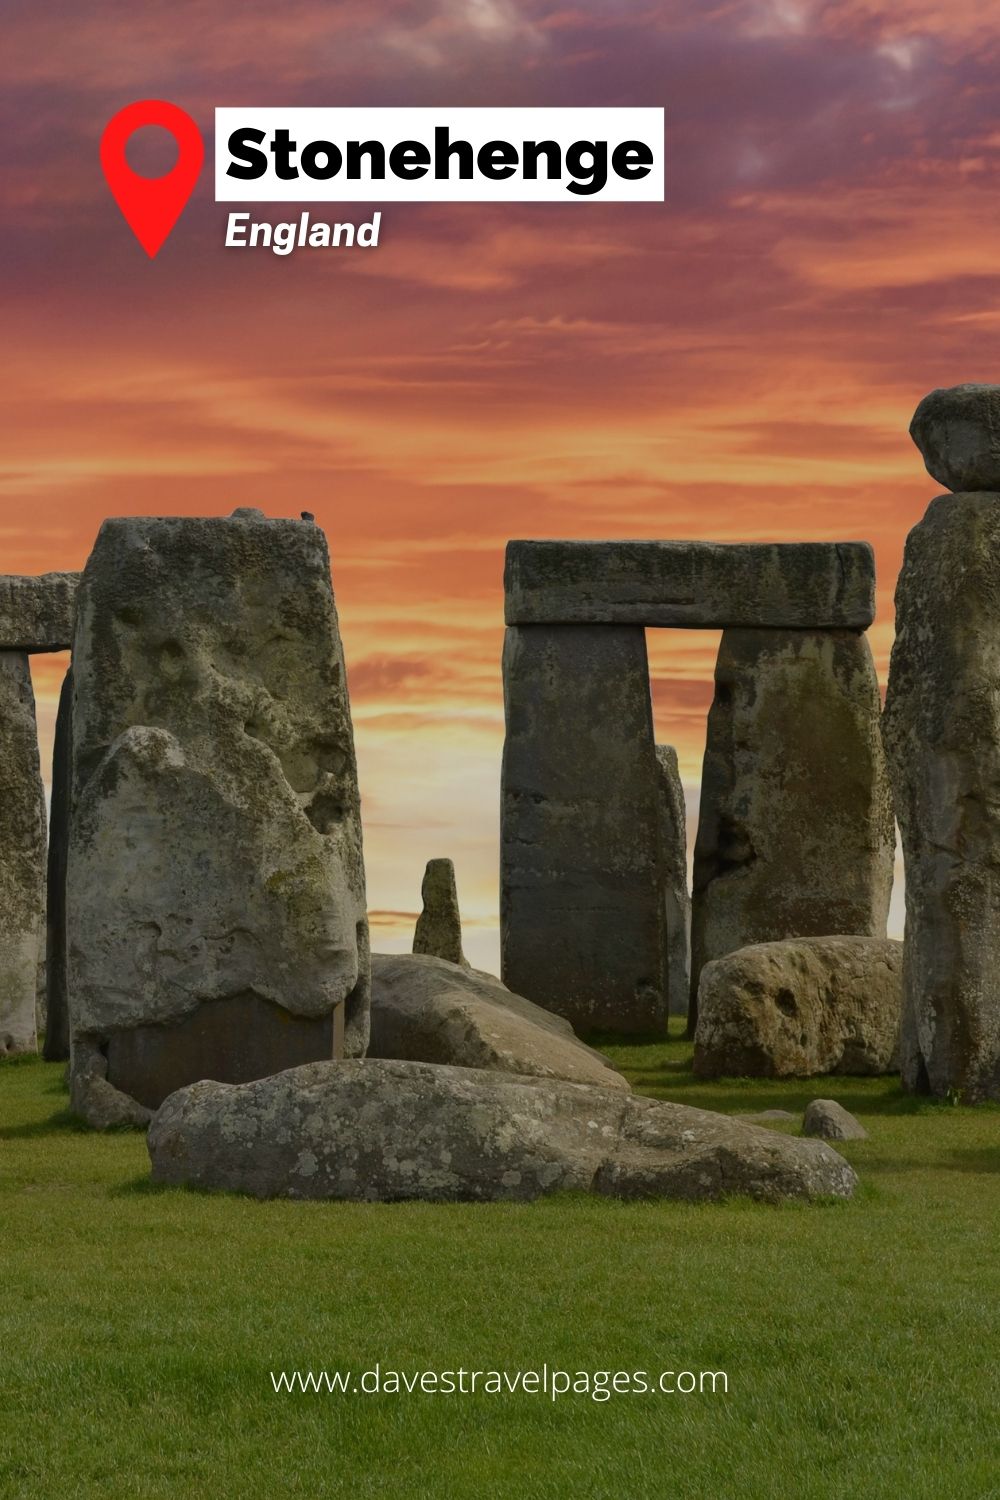 Stonehenge is one of the most famous Europe landmarks